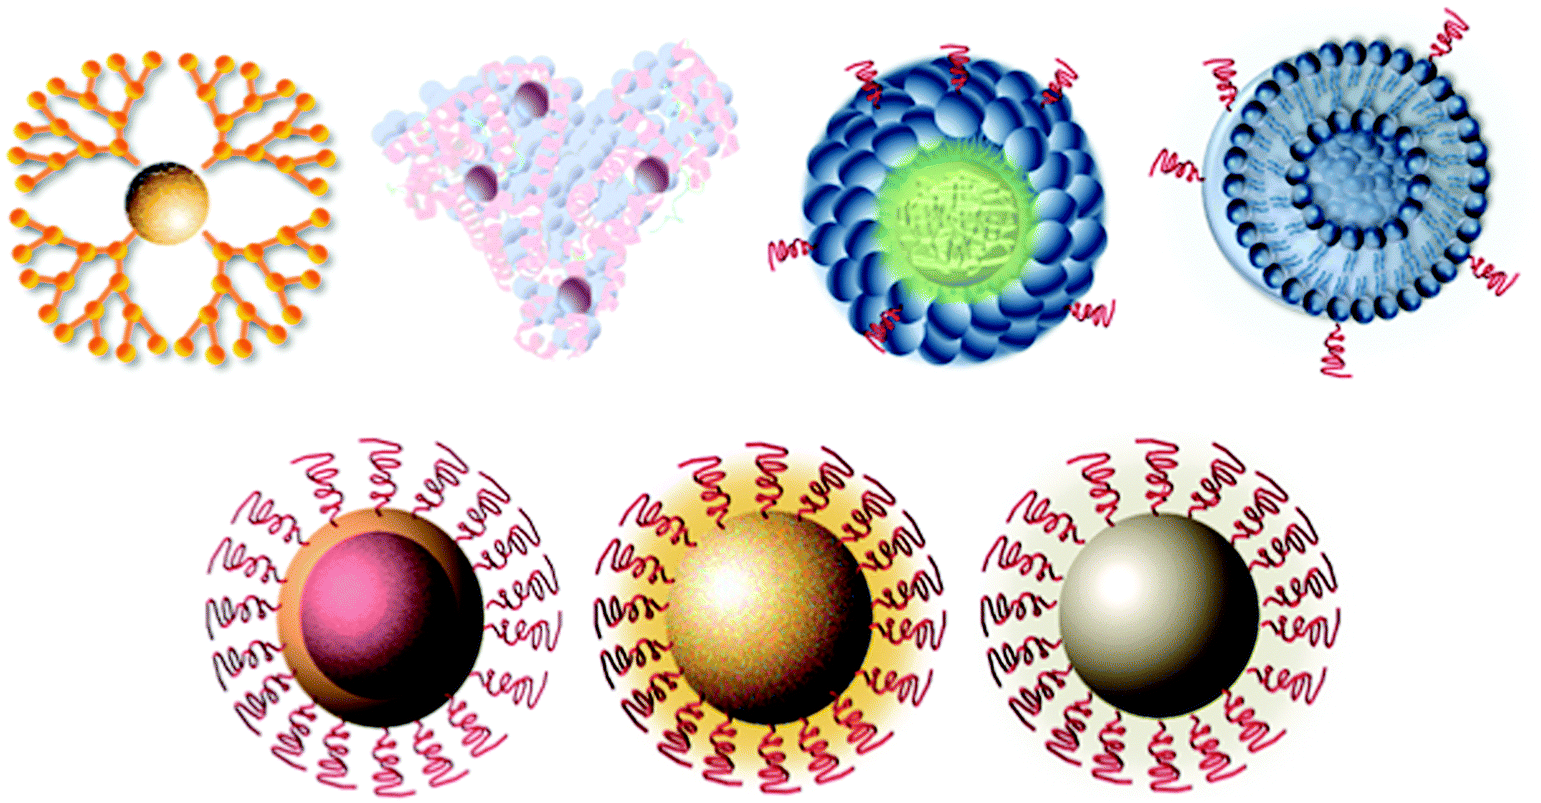 Nanoparticles And Their Applications In Cell And Molecular Biology Biology (RSC Publishing) DOI:10.1039 C3IB40165K